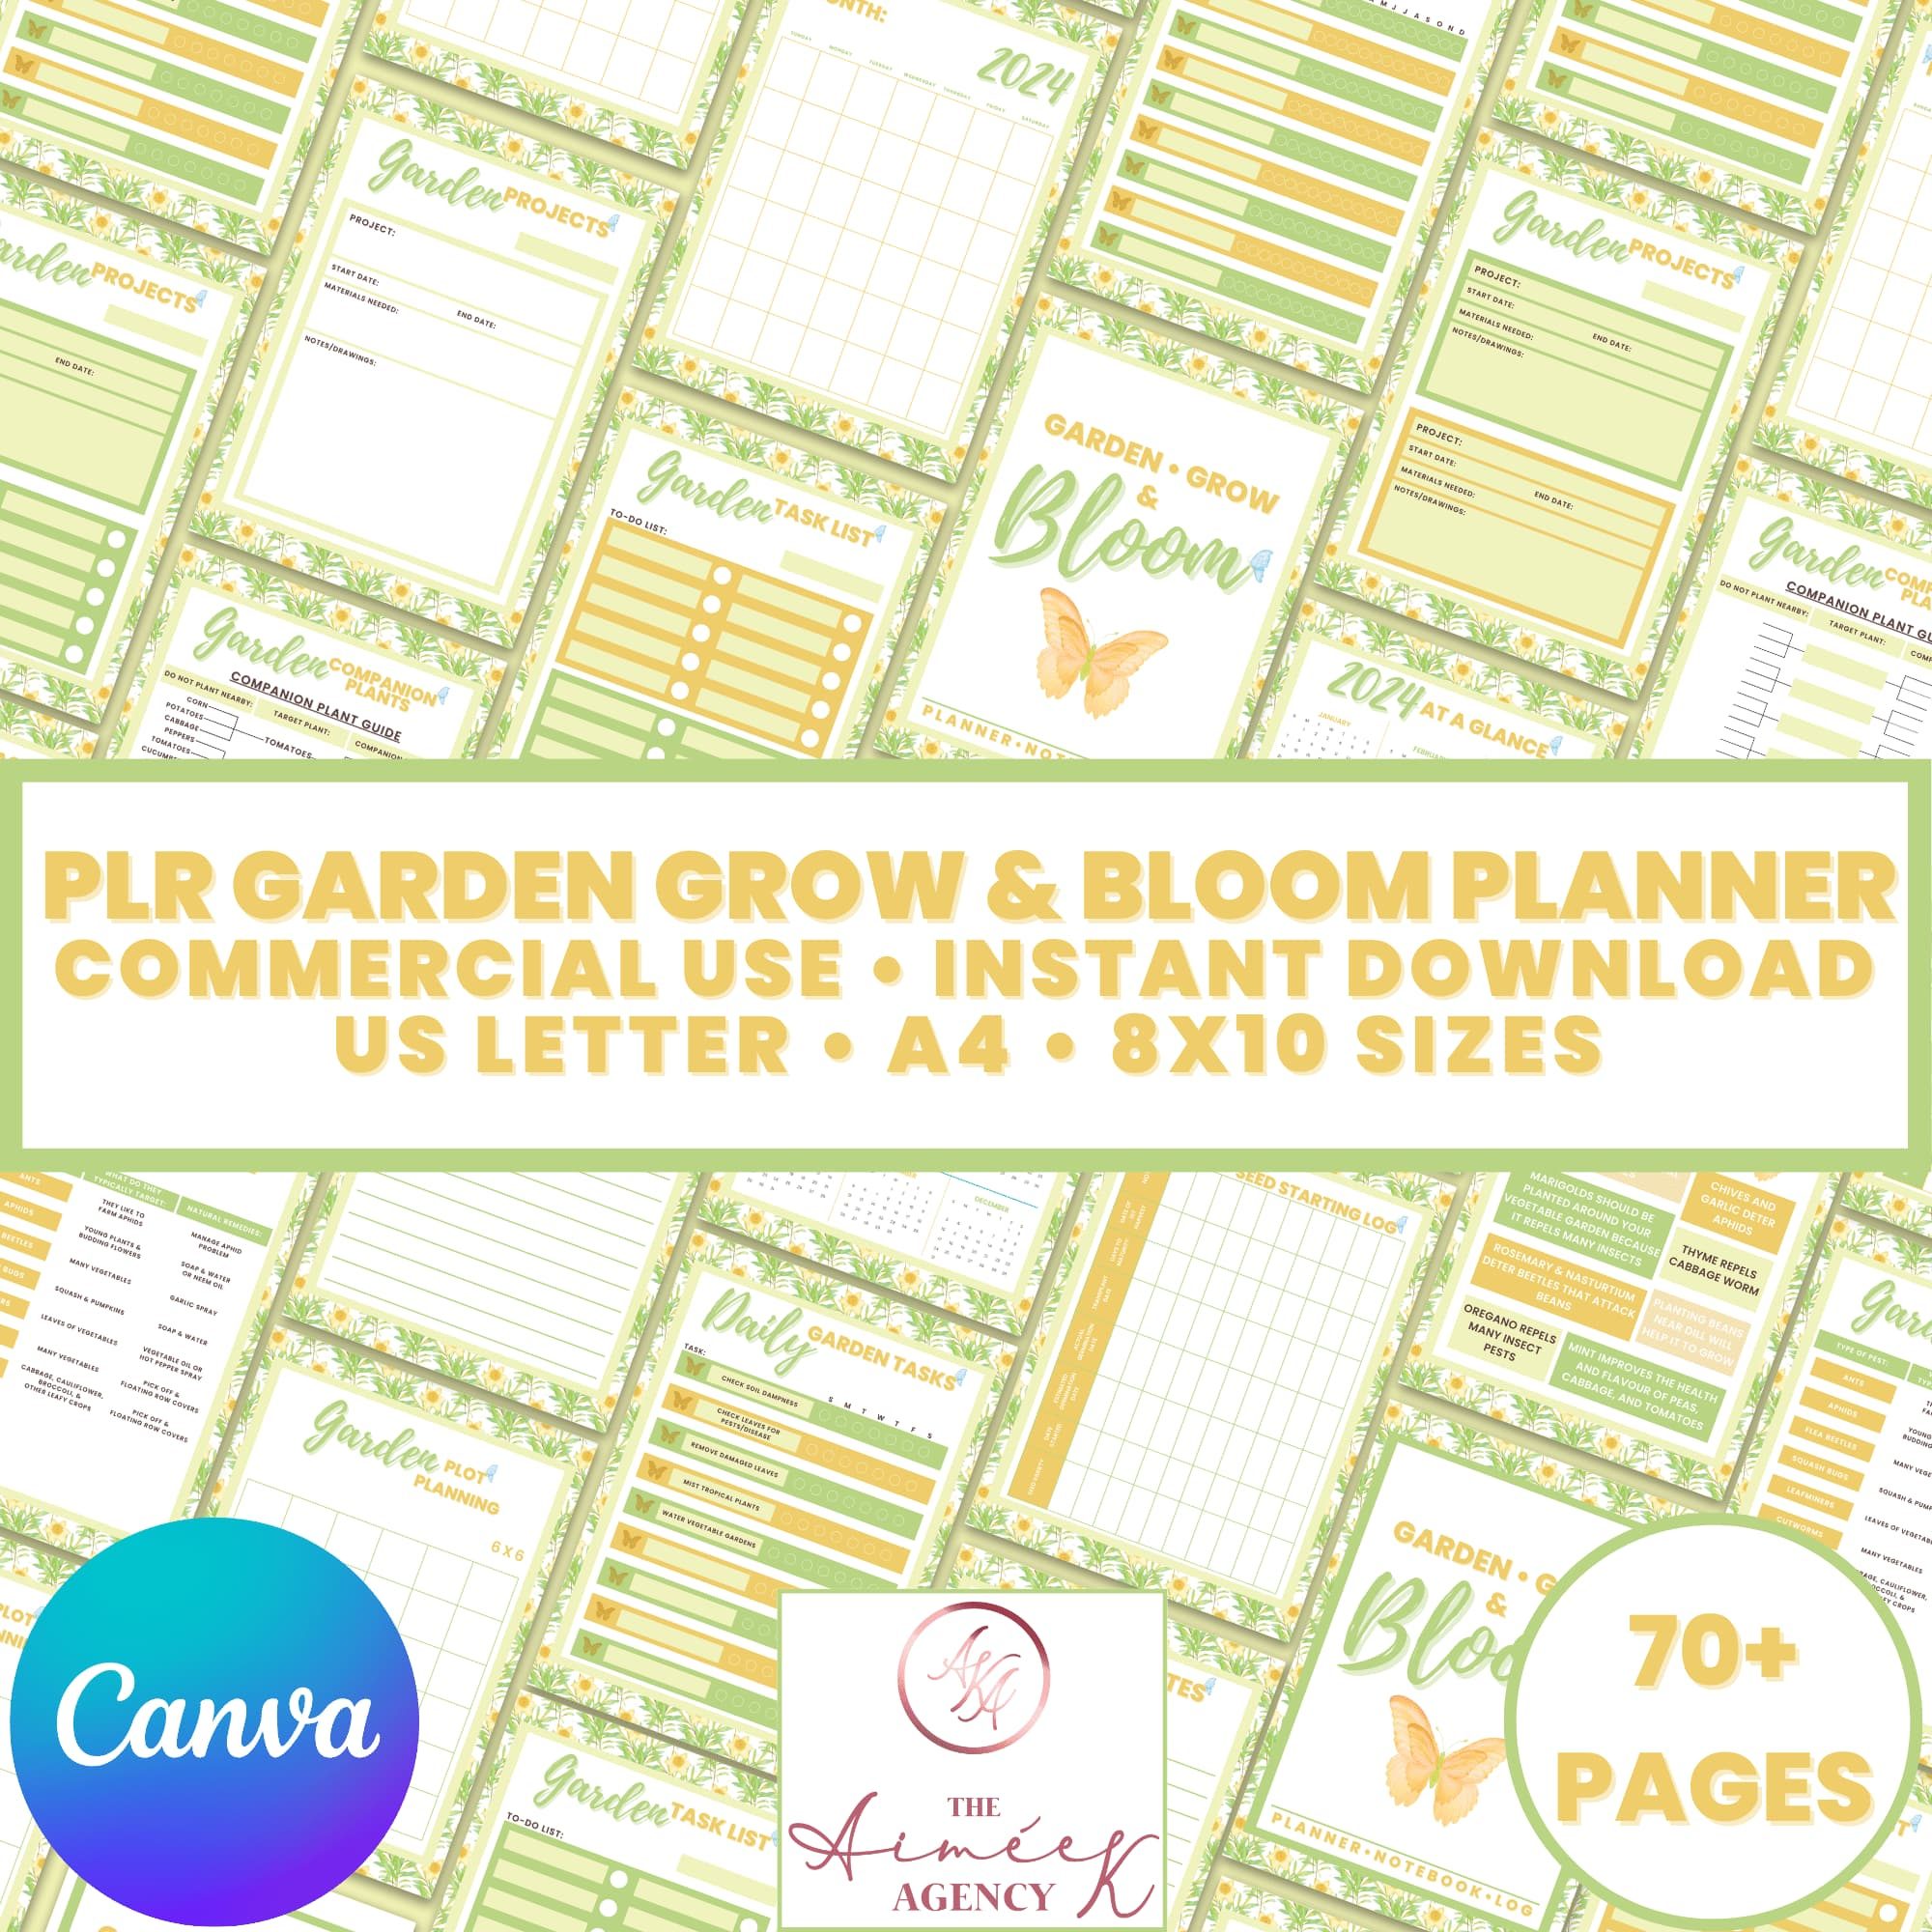 Garden grow and bloom planner with PLR Rights